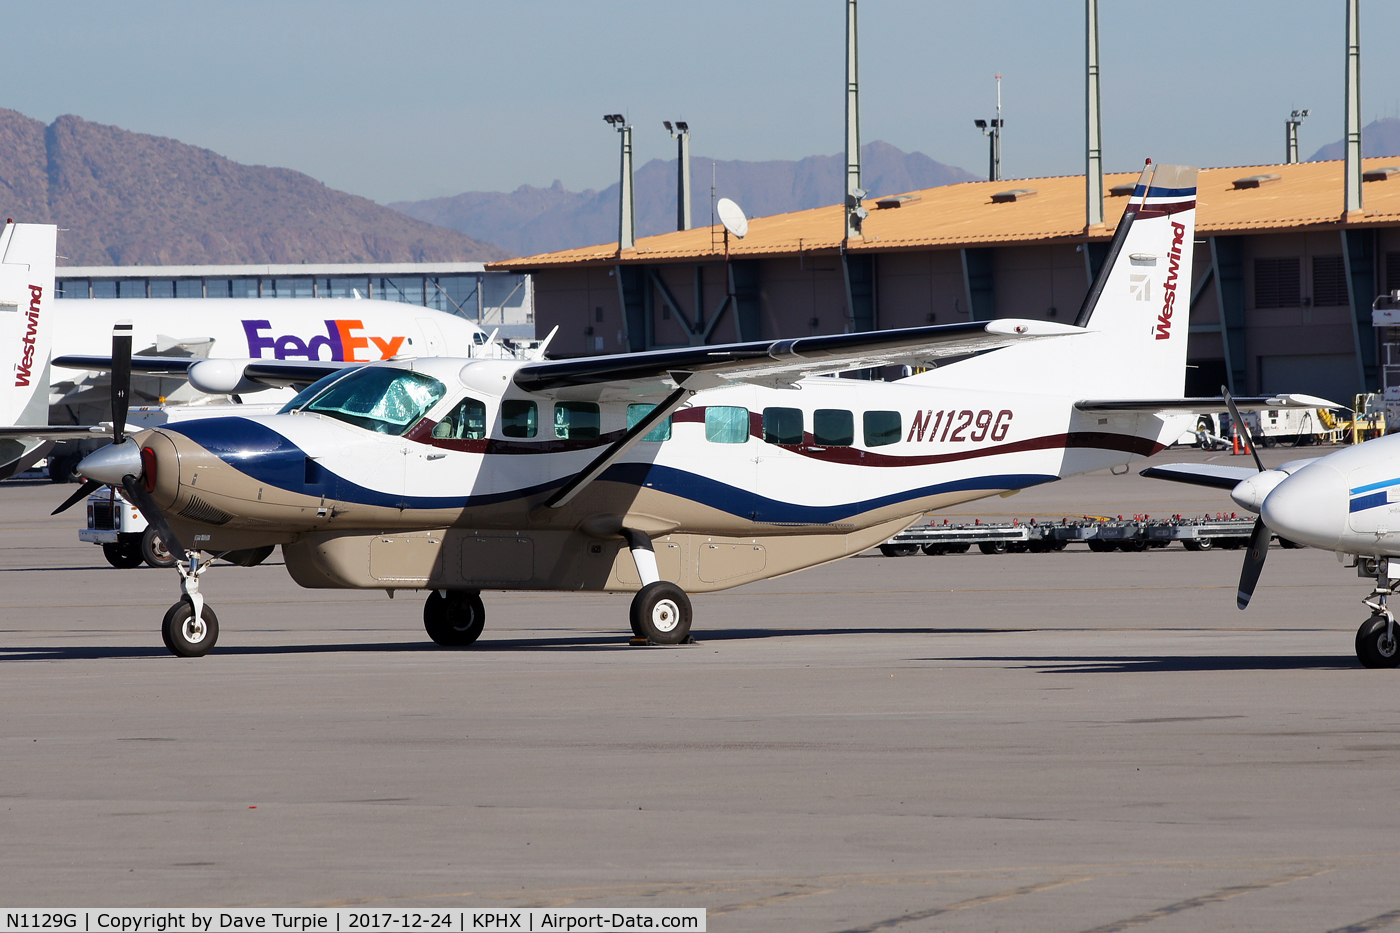 N1129G, 2001 Cessna 208B Grand Caravan C/N 208B0924, Westwind Avaition, a good way to get to the Grand Canyon.